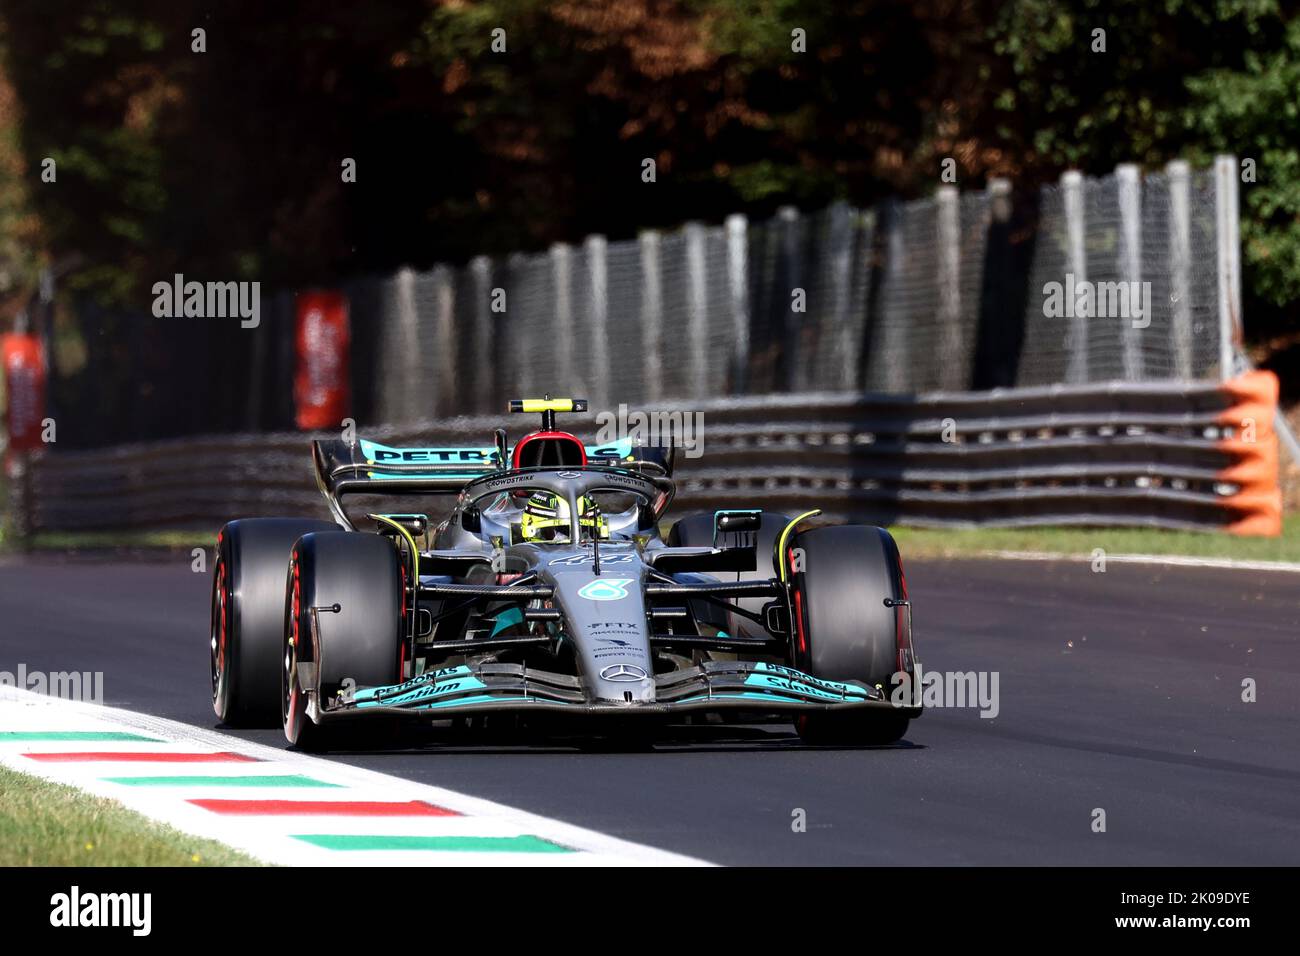 Lewis Hamilton of Mercedes AMG Petronas F1 Team on track during qualifying for the F1 Grand Prix of Italy